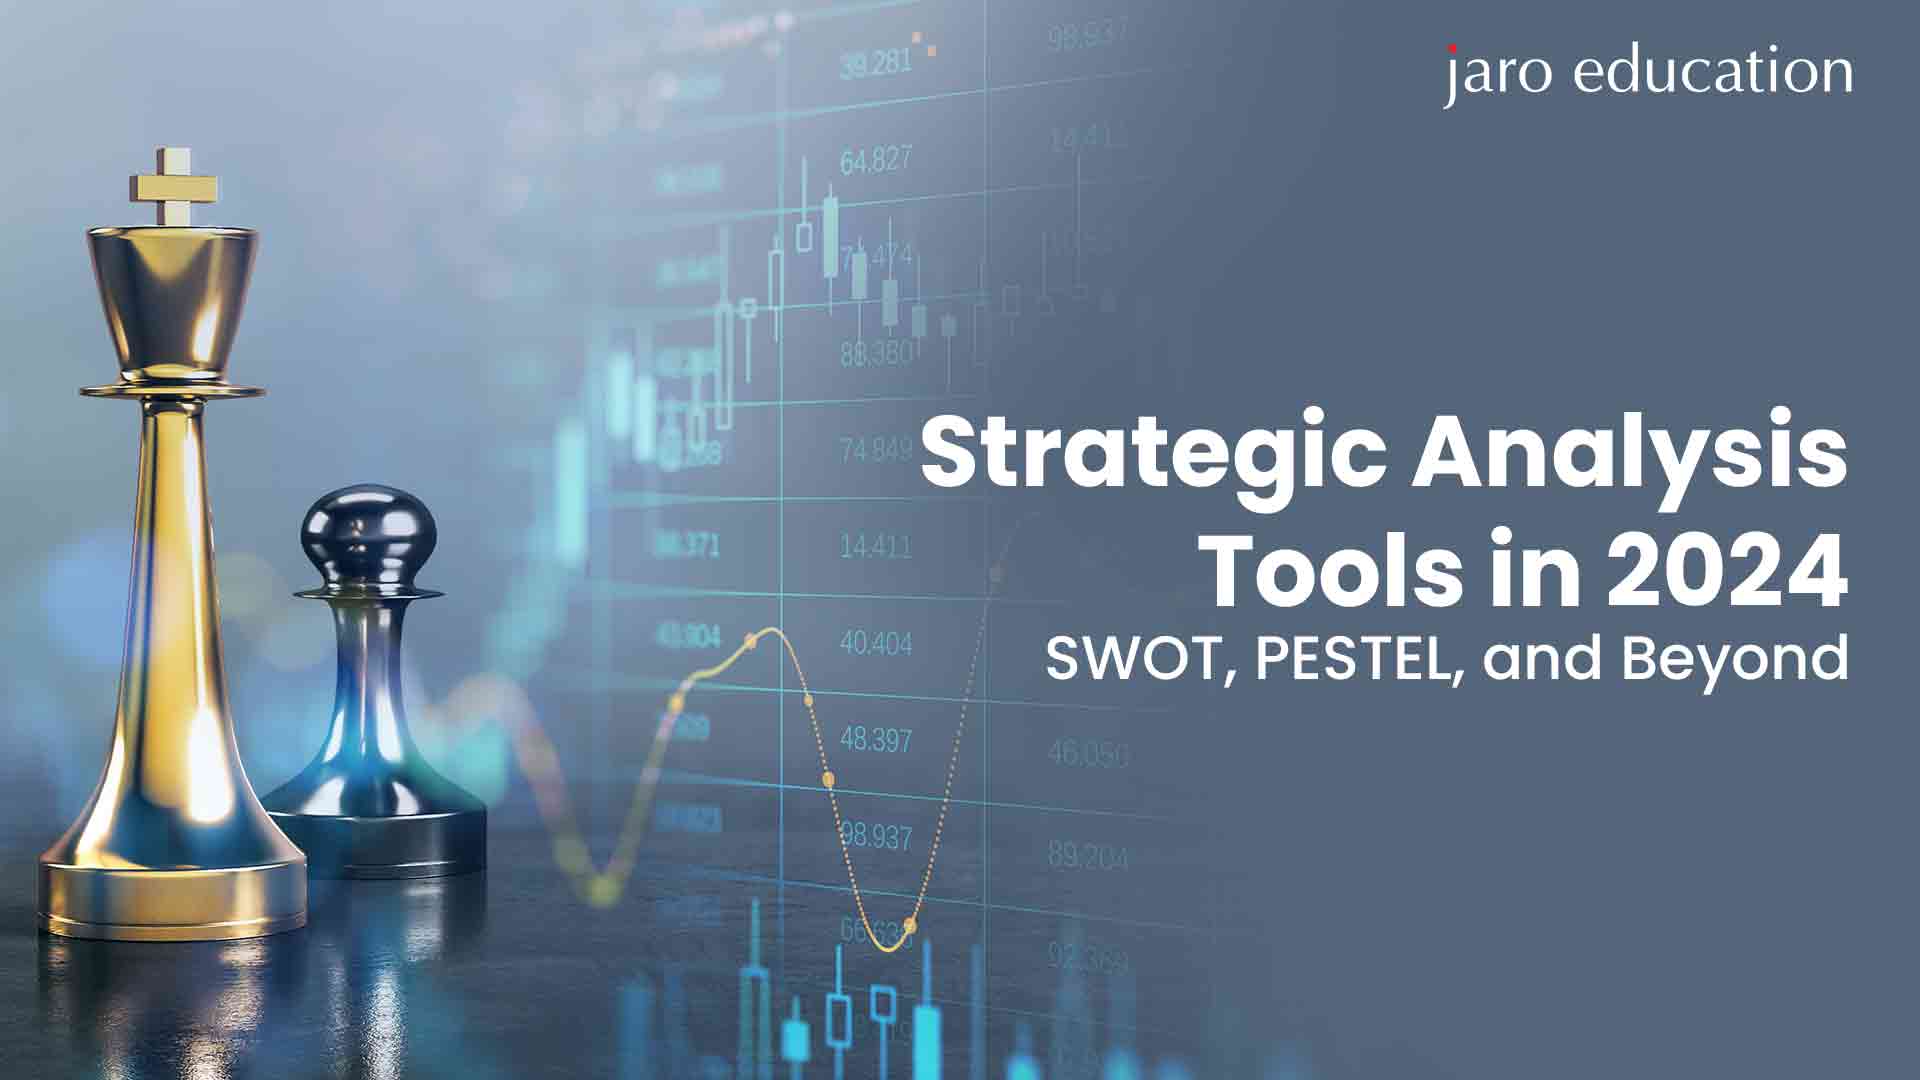 Strategic Analysis Tools in 2024 SWOT, PESTEL, and Beyond